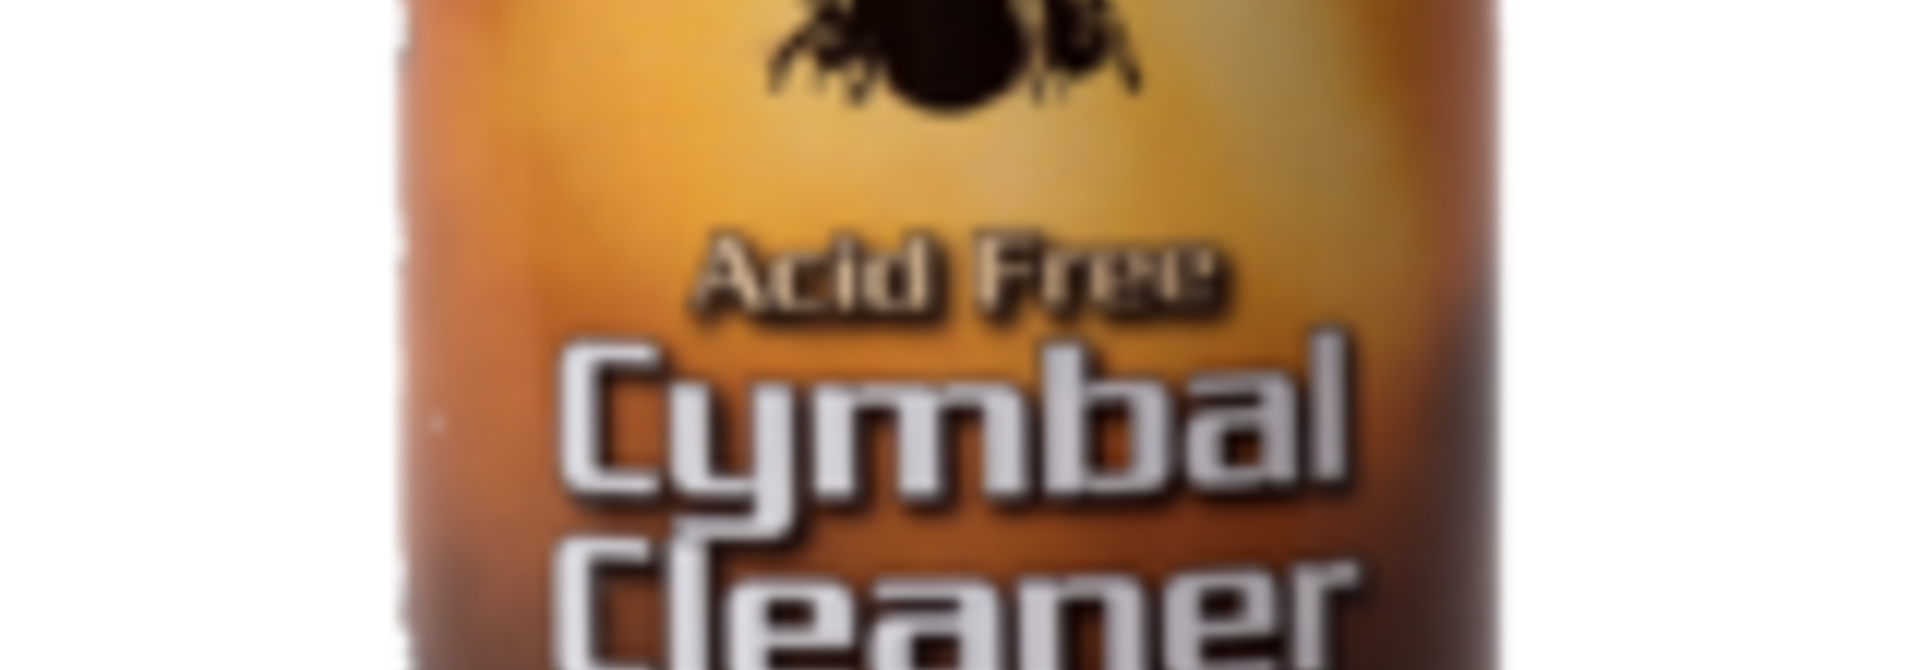 Music Nomad Cymbal Cleaner/ Drum Detailer MN117